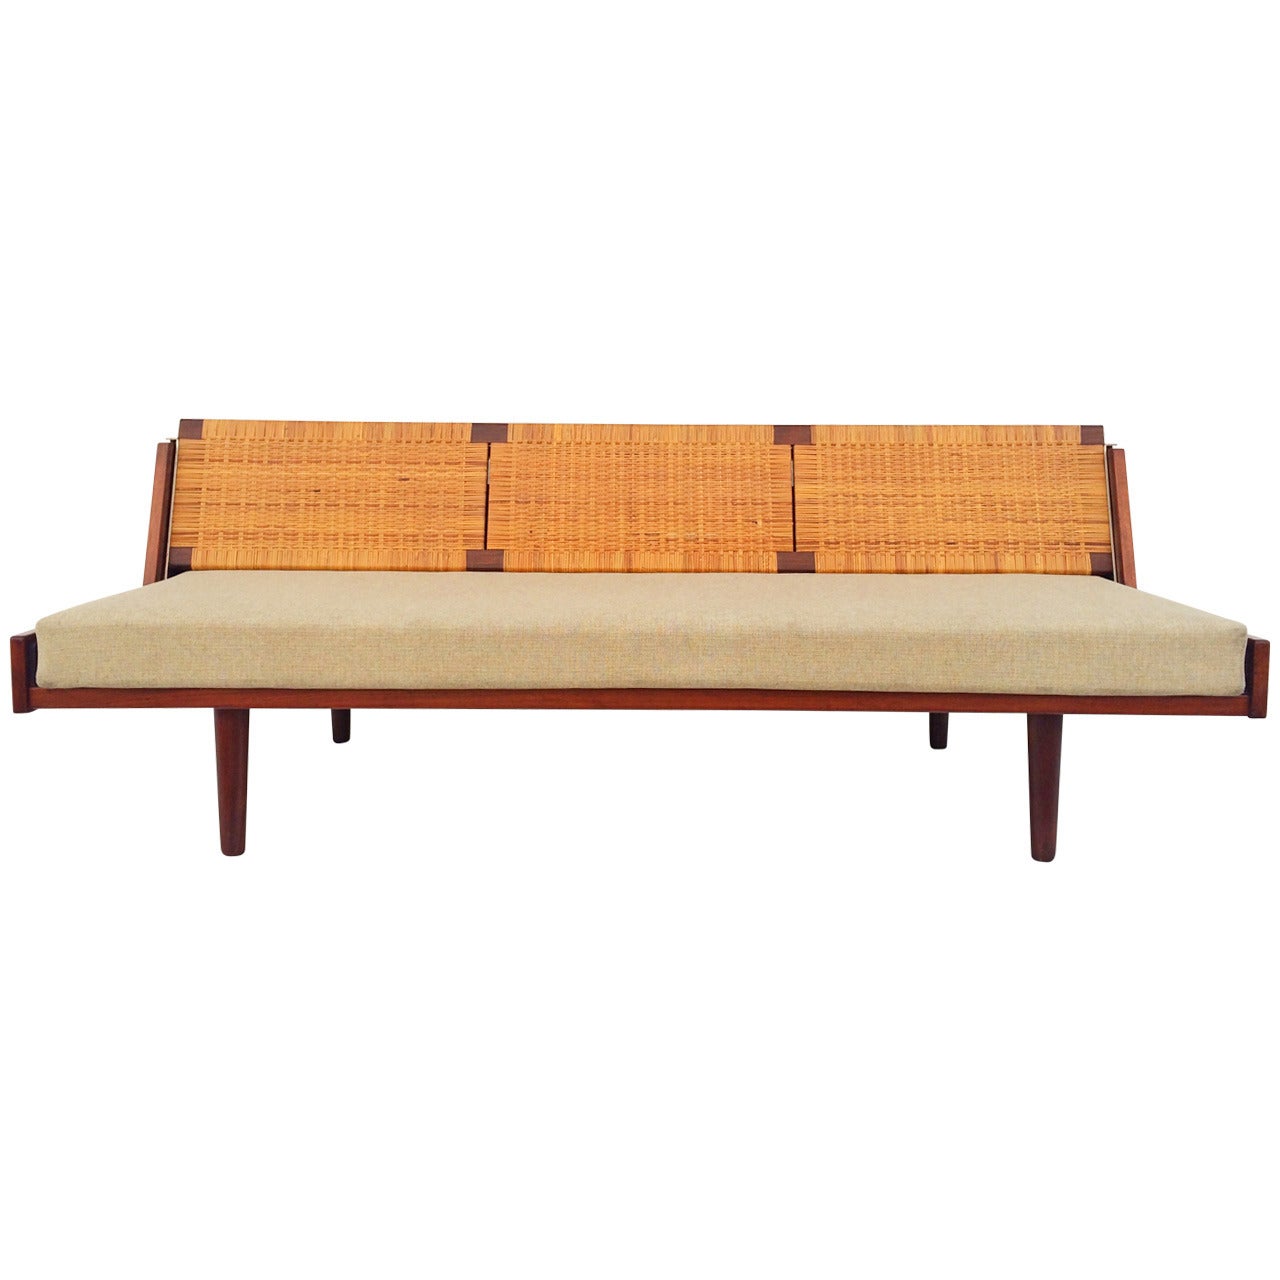 Teak and Rattan Daybed by Hans Wegner for Getama